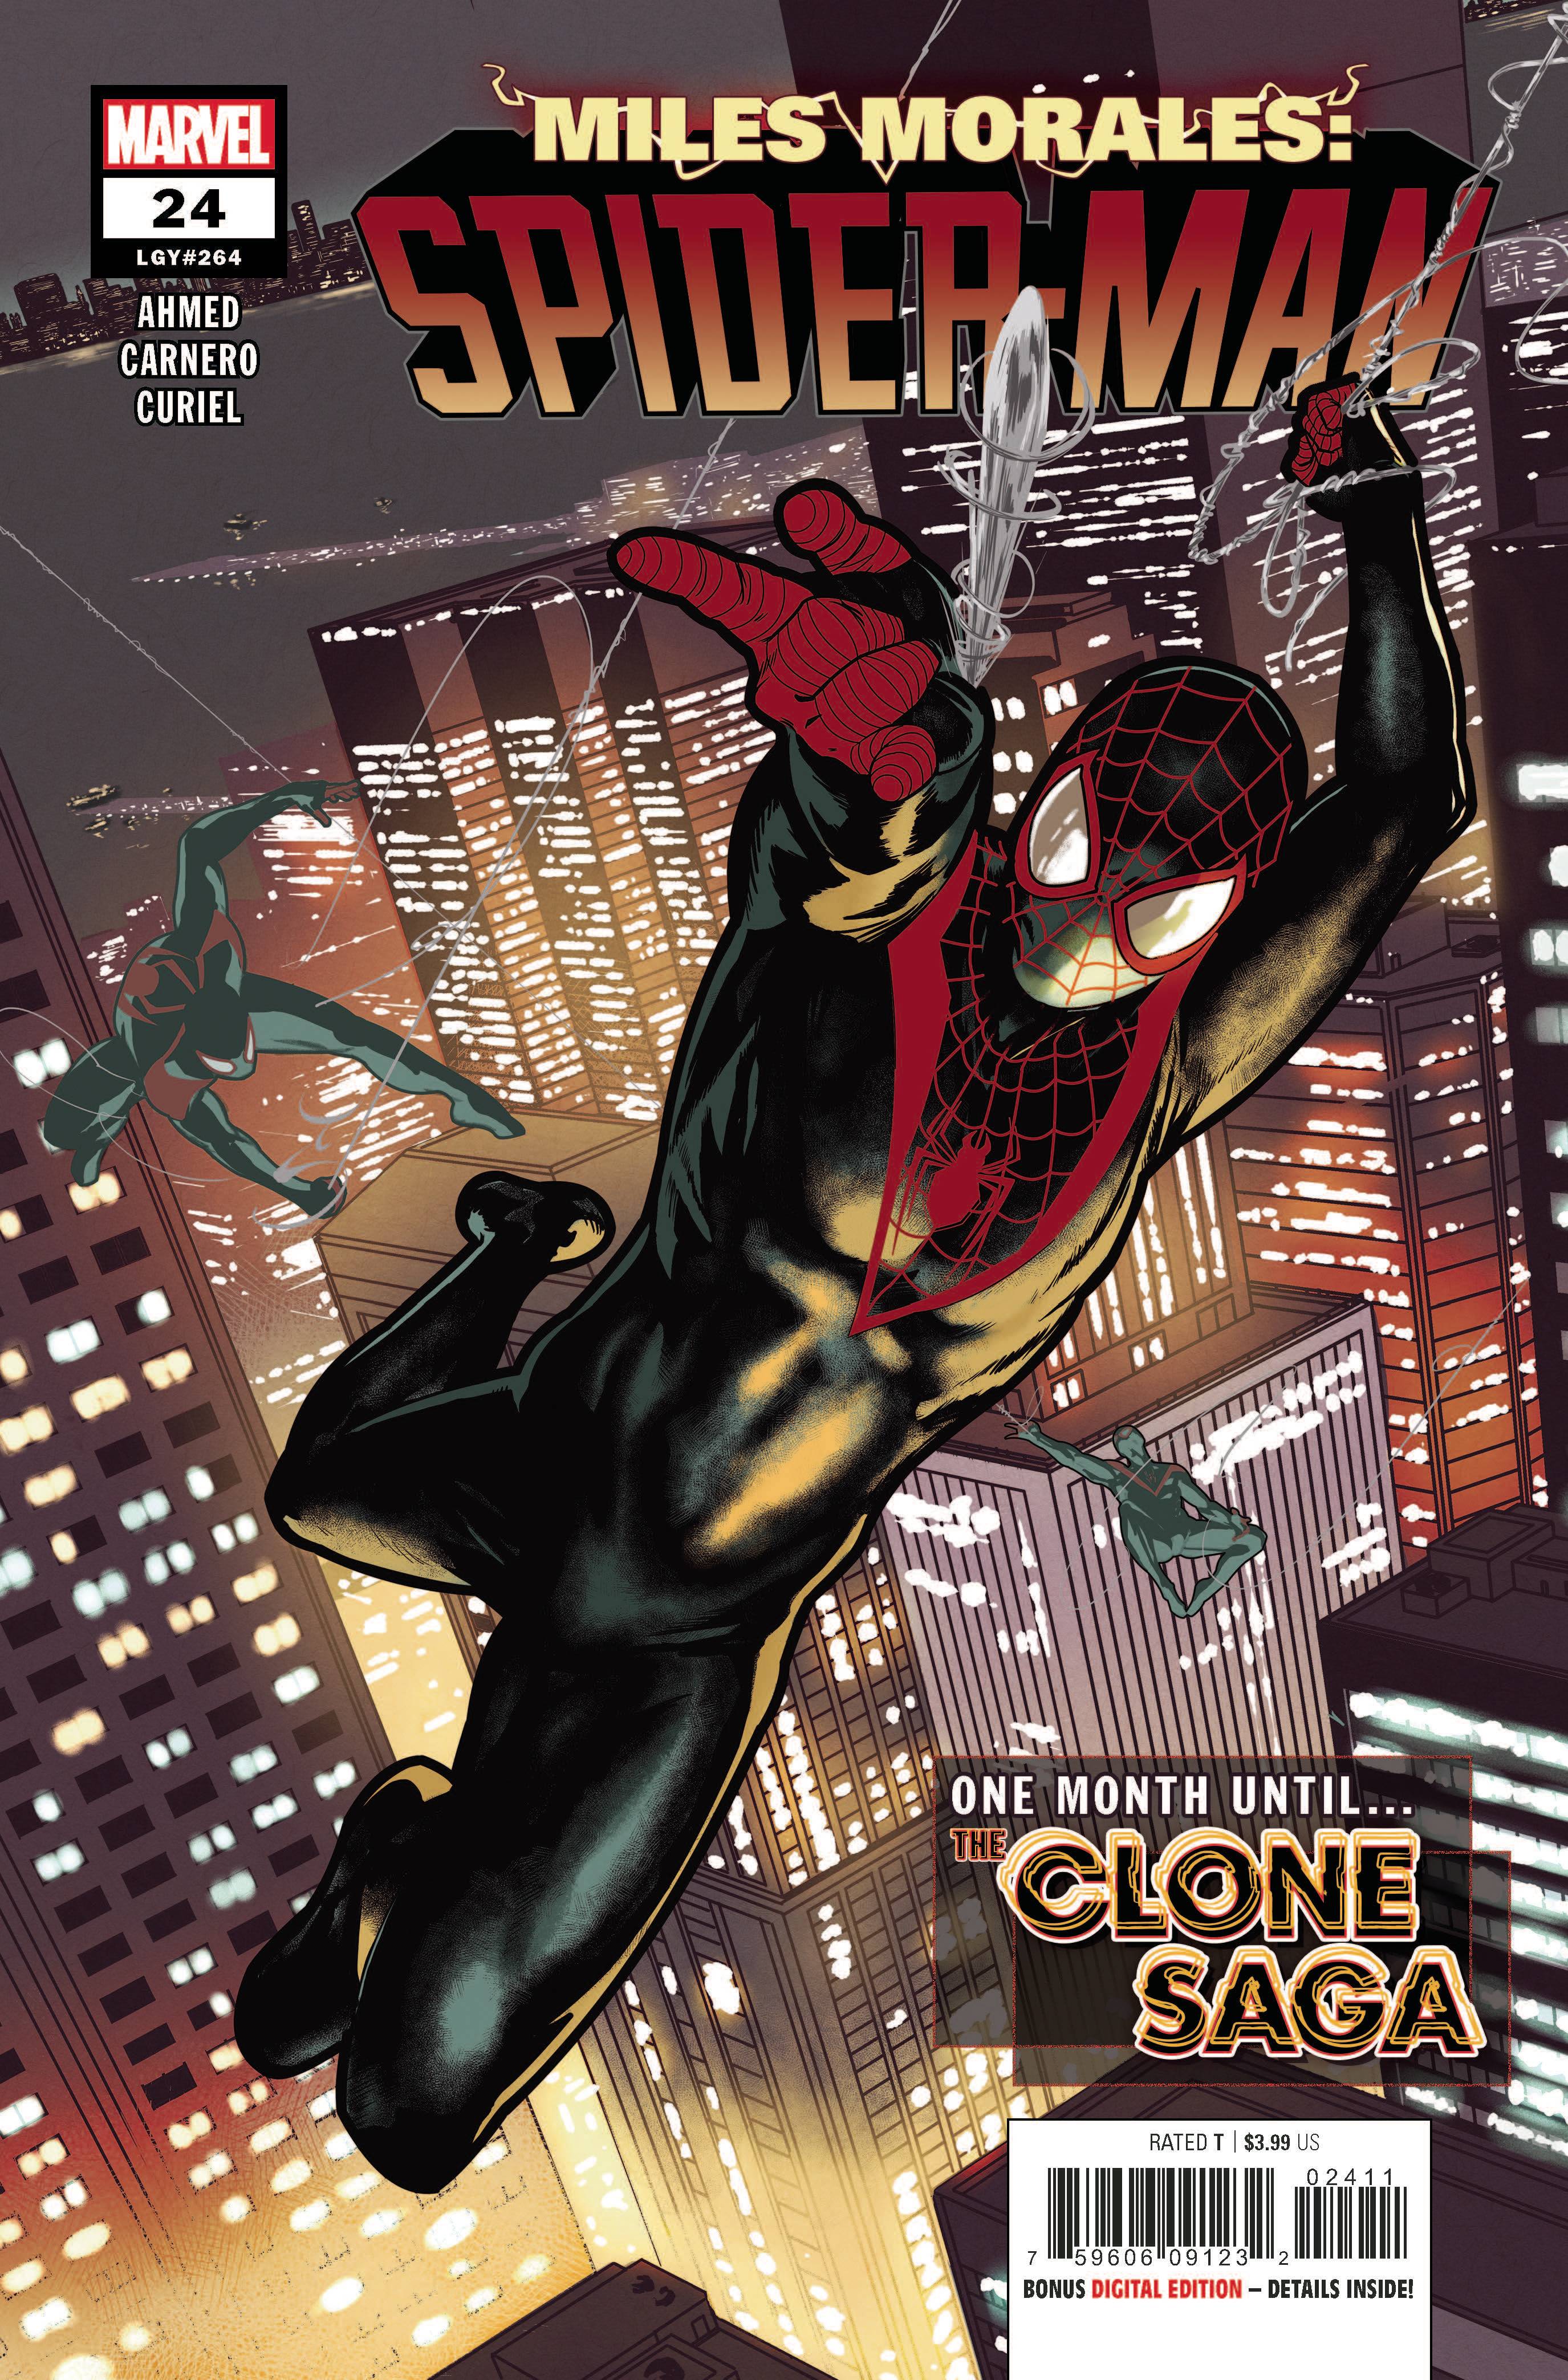 Miles Morales: Spider-Man #24 Cover A